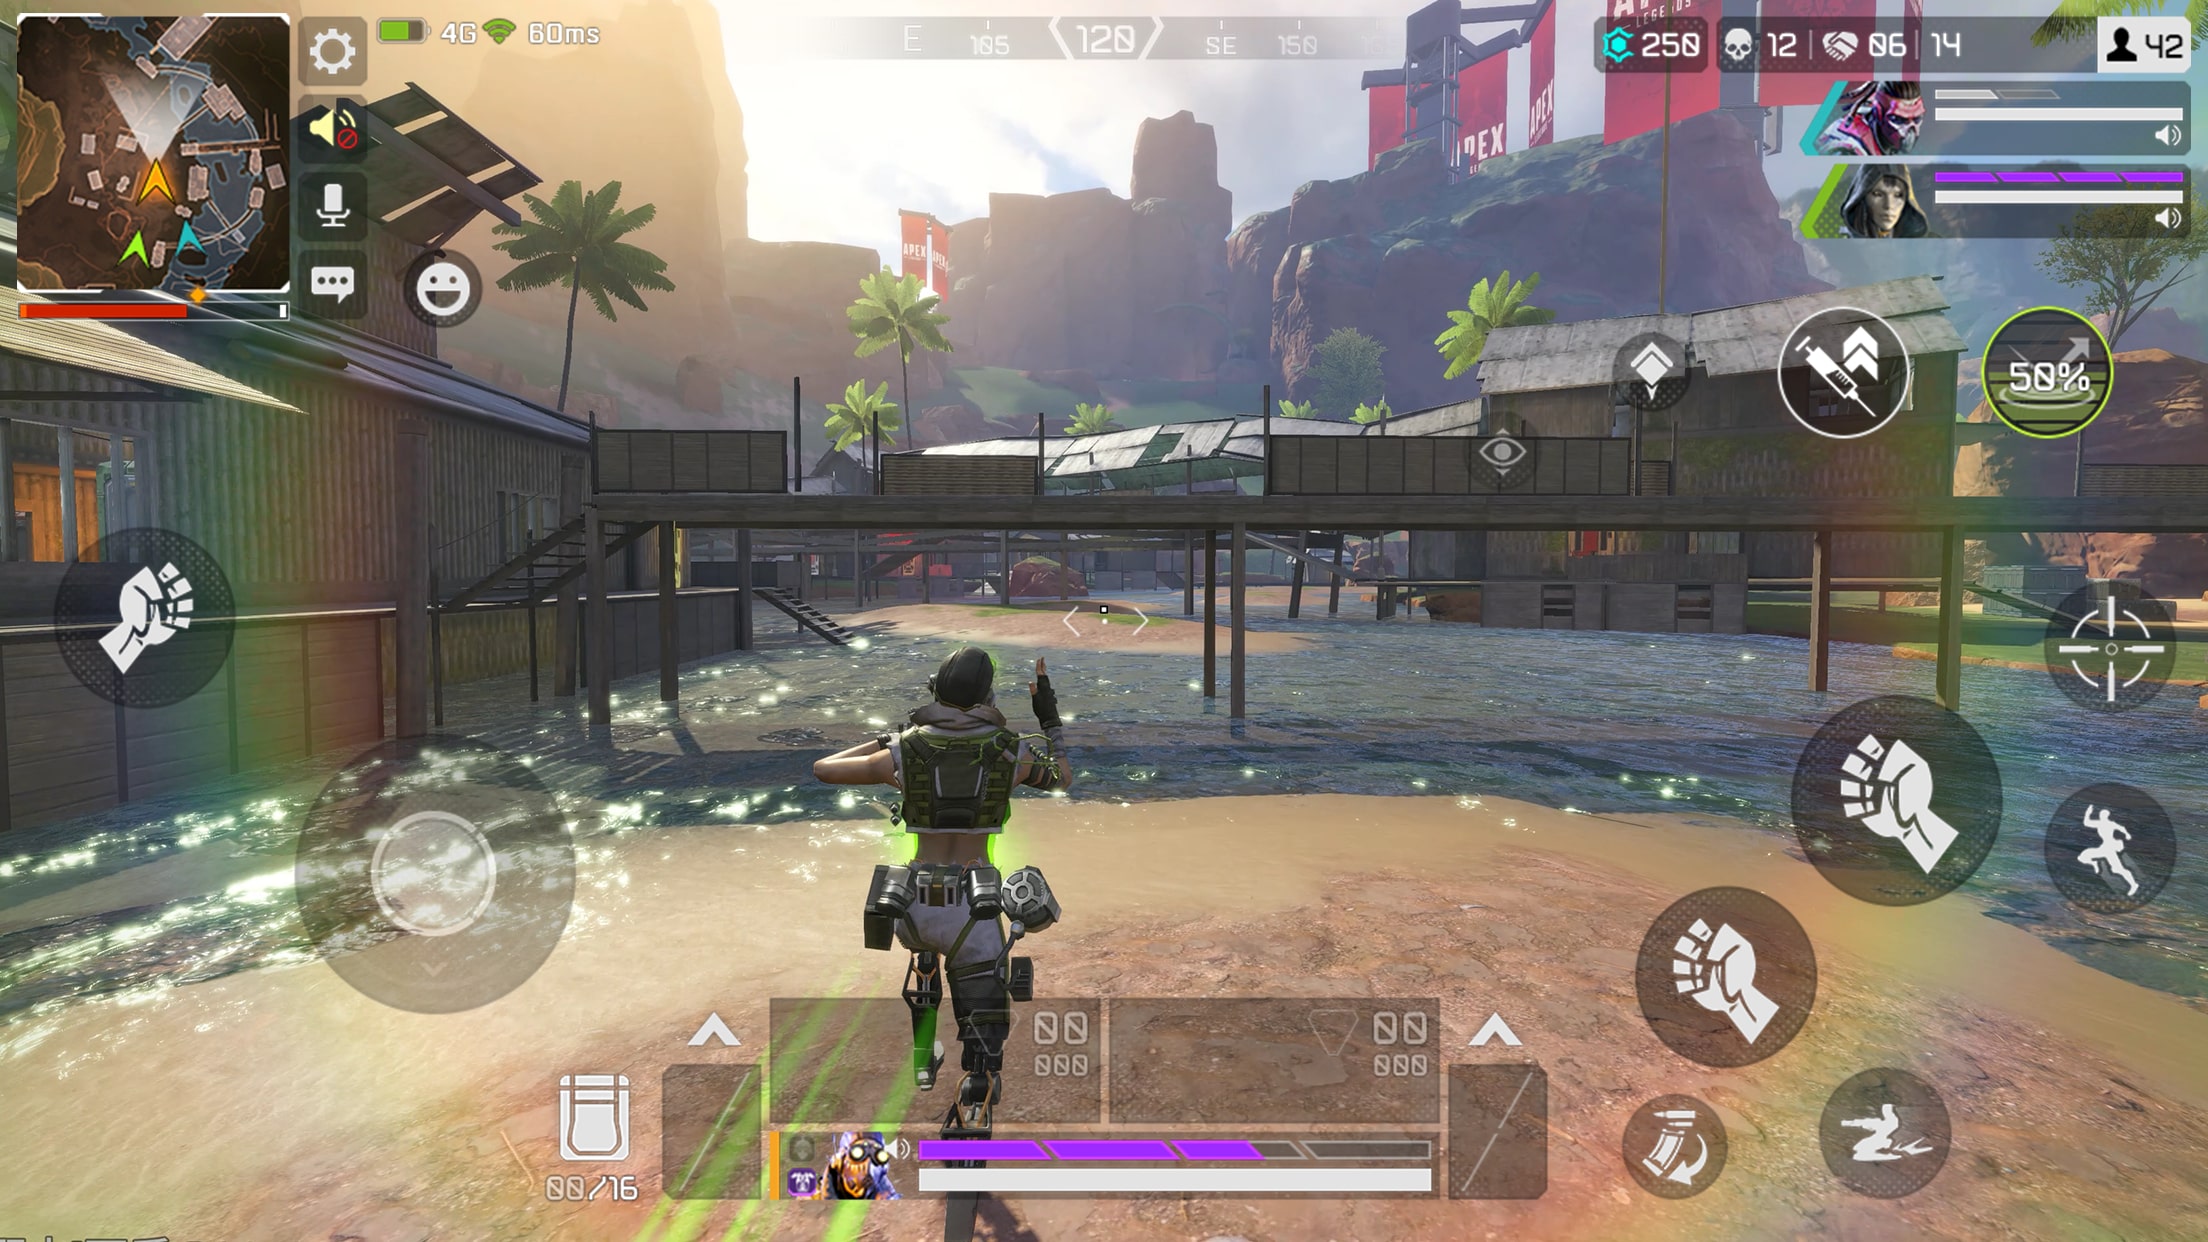 EA Is Shutting Down Apex Legends Mobile And Battlefield Mobile